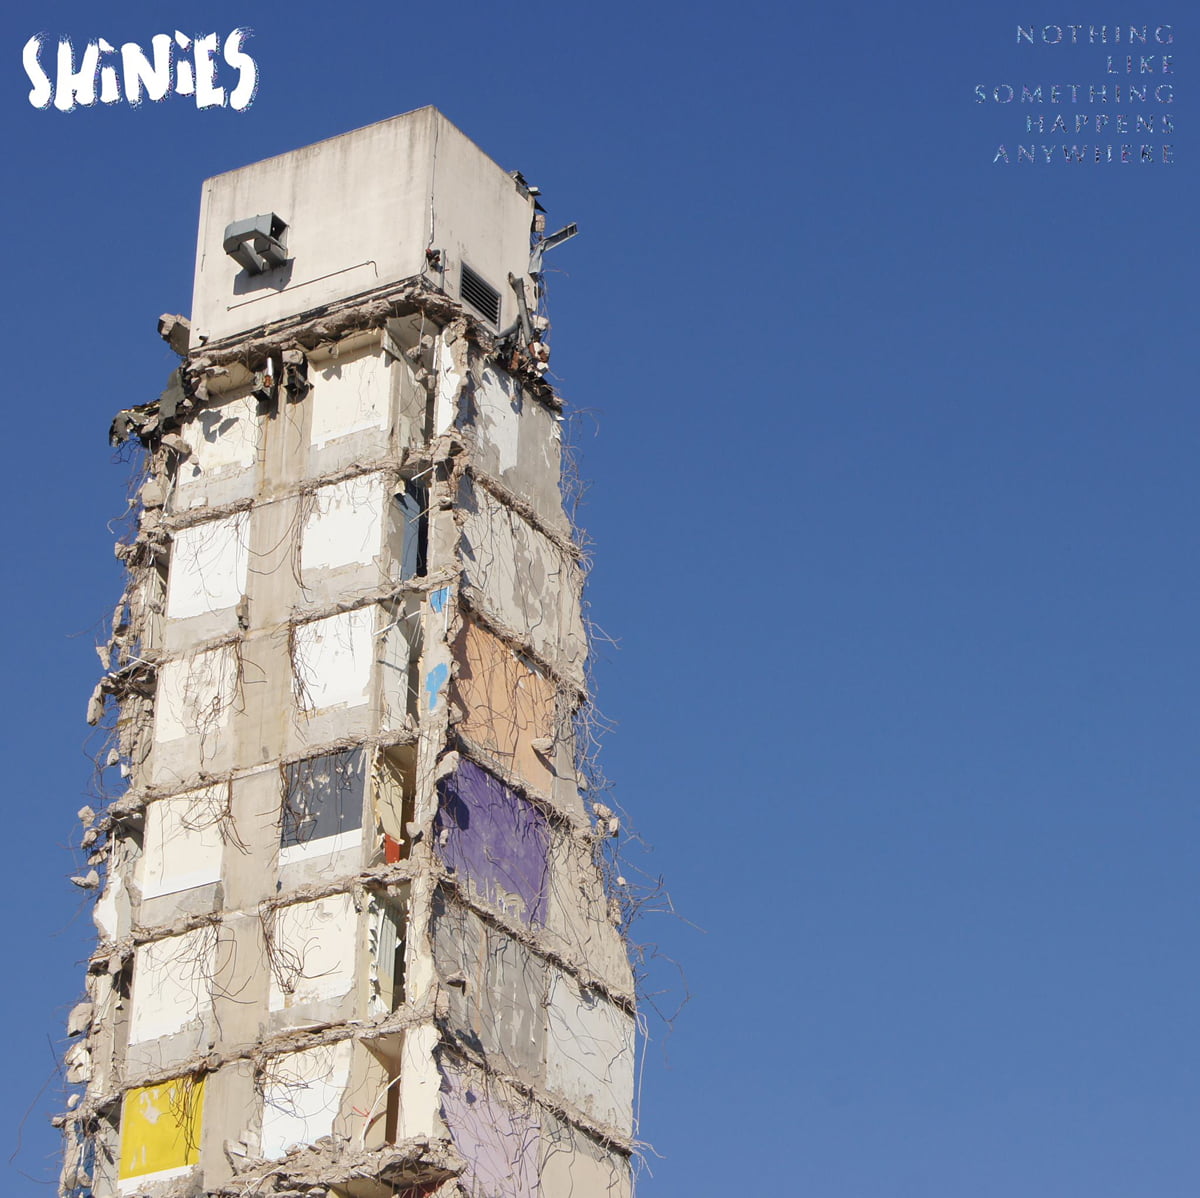 The VPME | ALBUM REVIEW - SHINIES - 'Nothing Like Something Happens Anywhere' 1